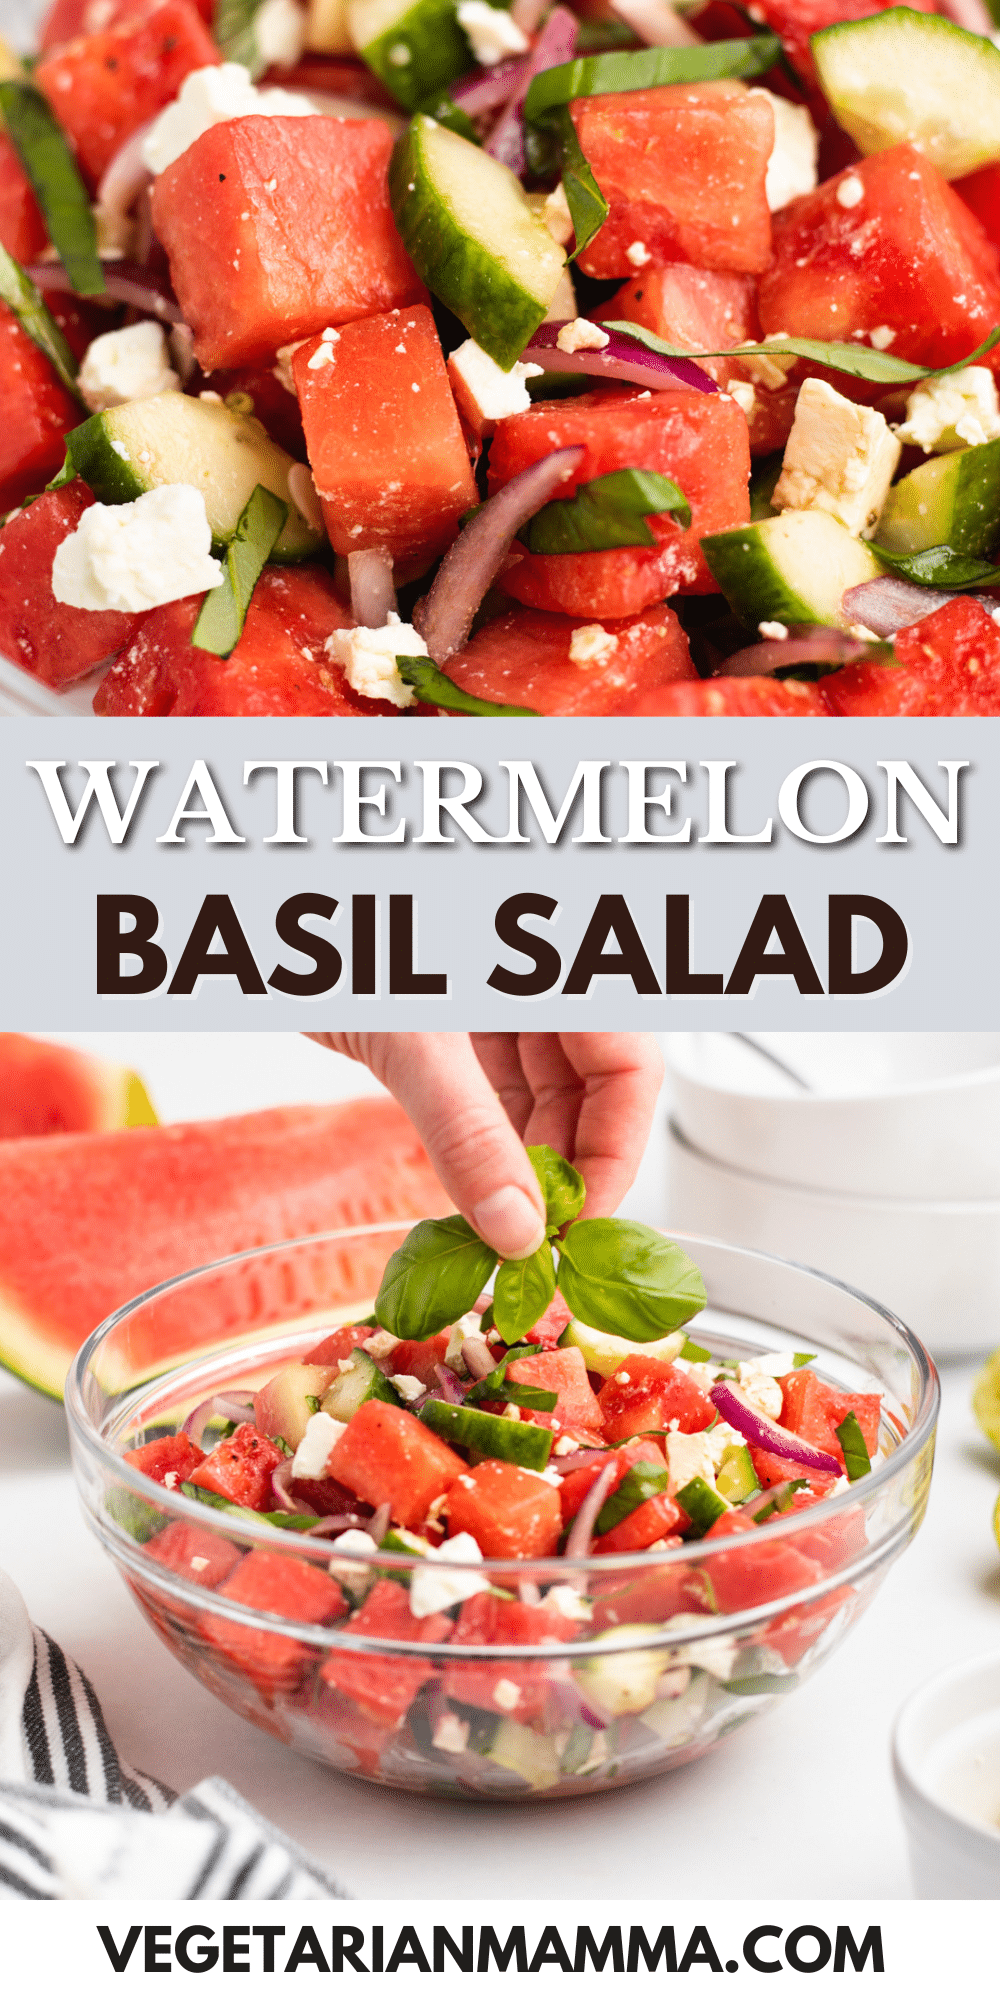 Sweet, savory, and totally refreshing, this healthy Watermelon Basil Salad with balsamic dressing and feta cheese is anything but ordinary!